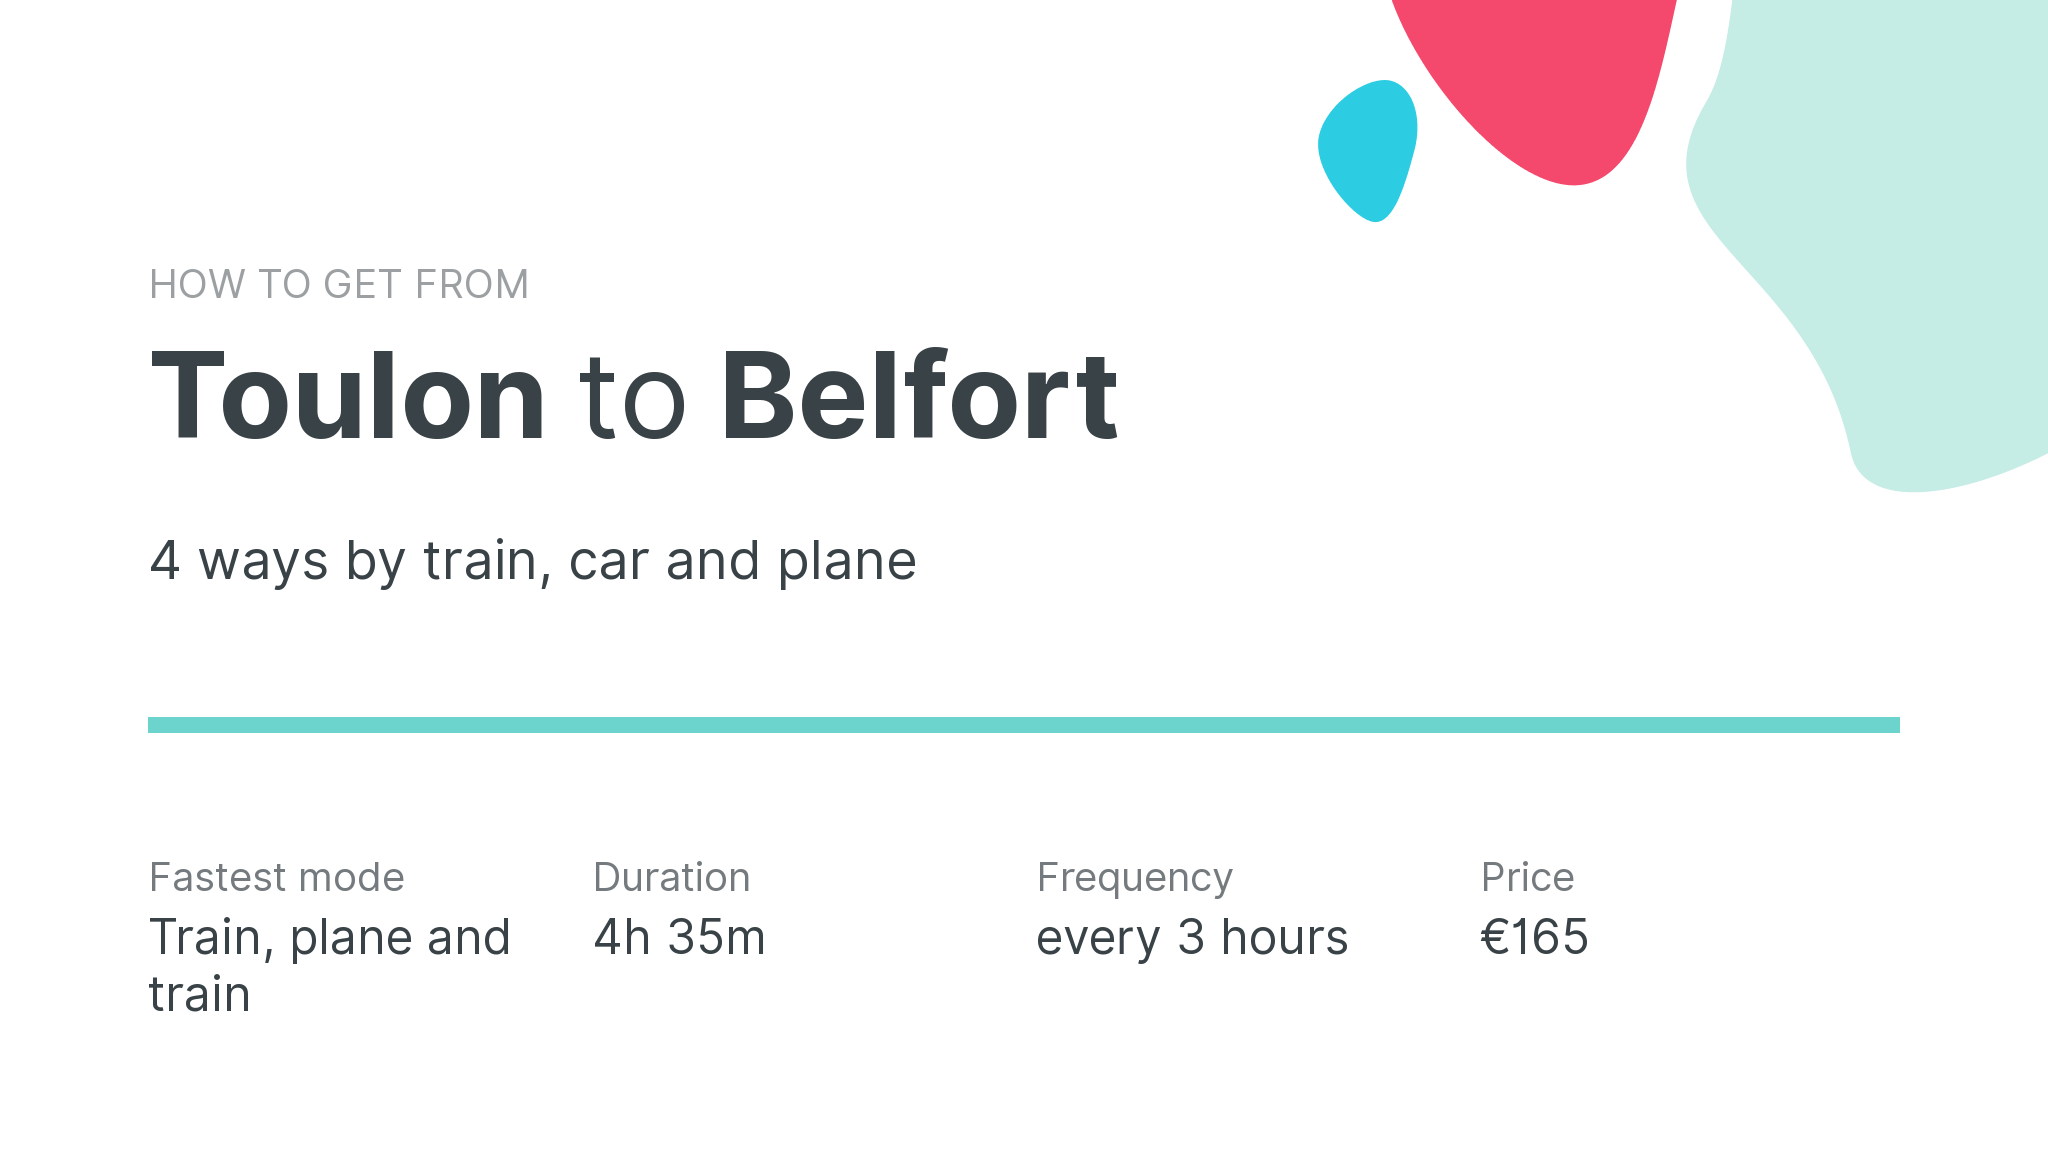 How do I get from Toulon to Belfort